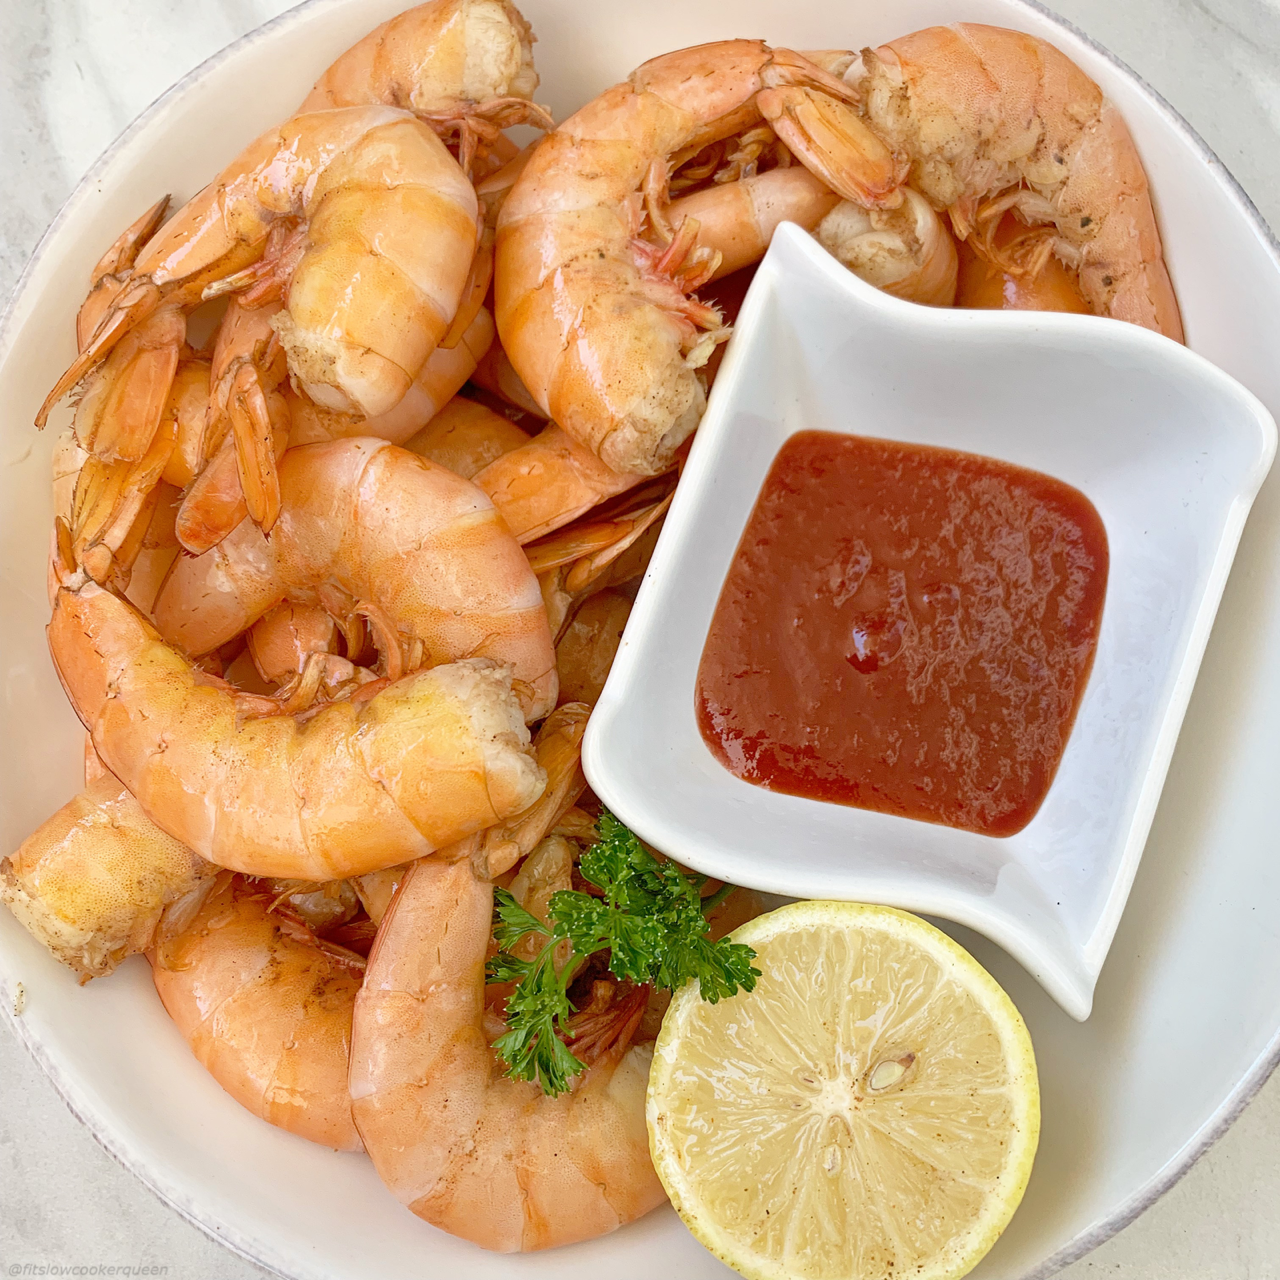 Peel and Eat shrimp are an easy, fun-to-eat shrimp dish. This slow cooker version uses a homemade Old Bay seasoning making healthy seasoned shrimp.